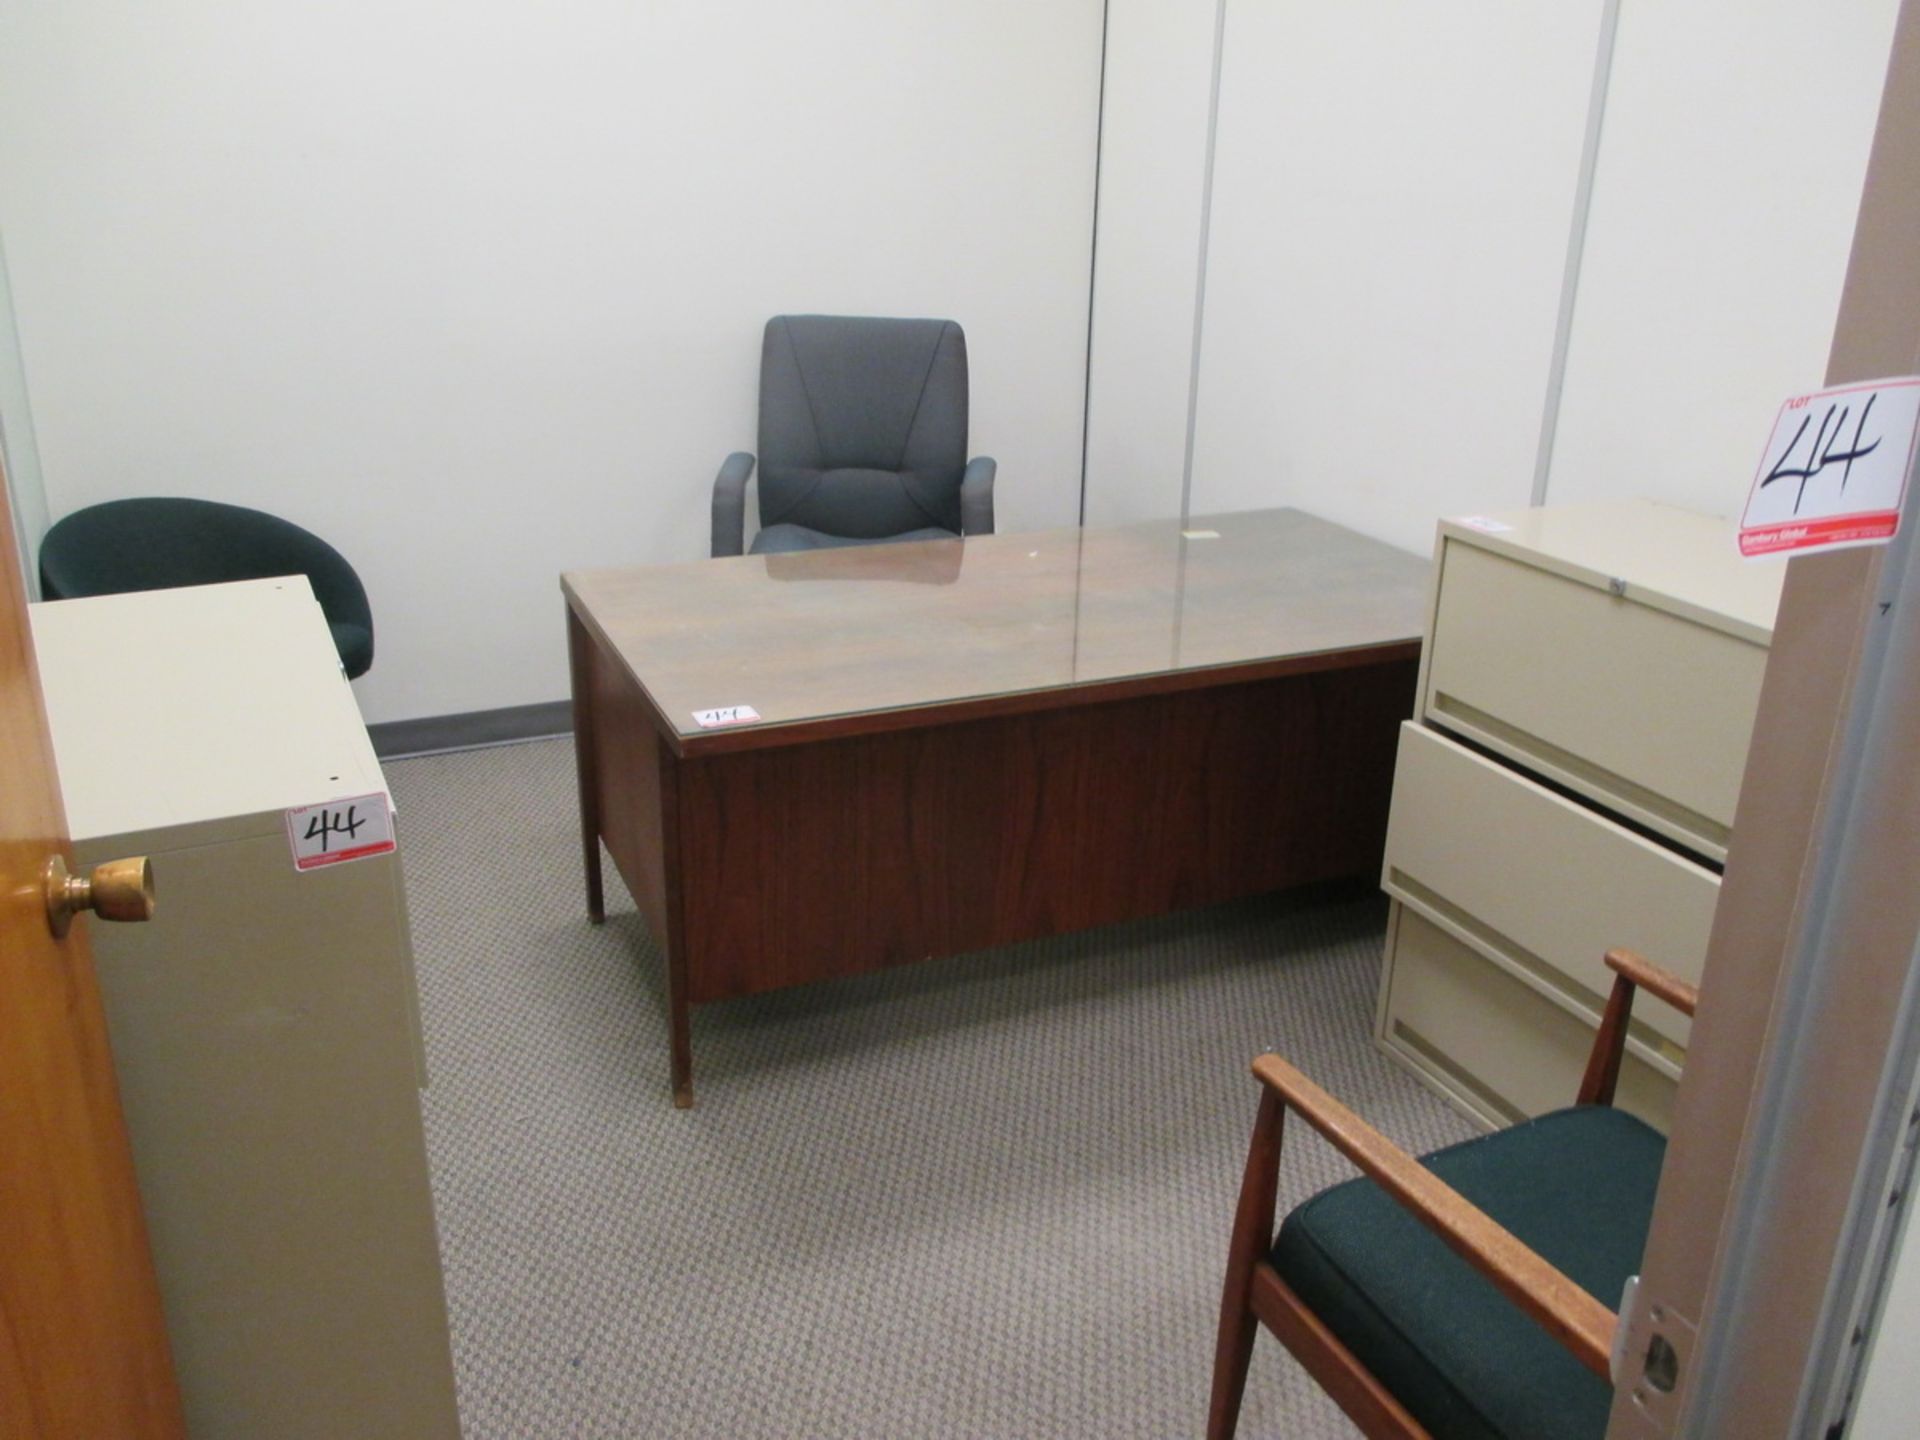 LOT - WALNUT DESK, BEIGE 3-DR LATERAL FILE CABINETS + CHAIRS